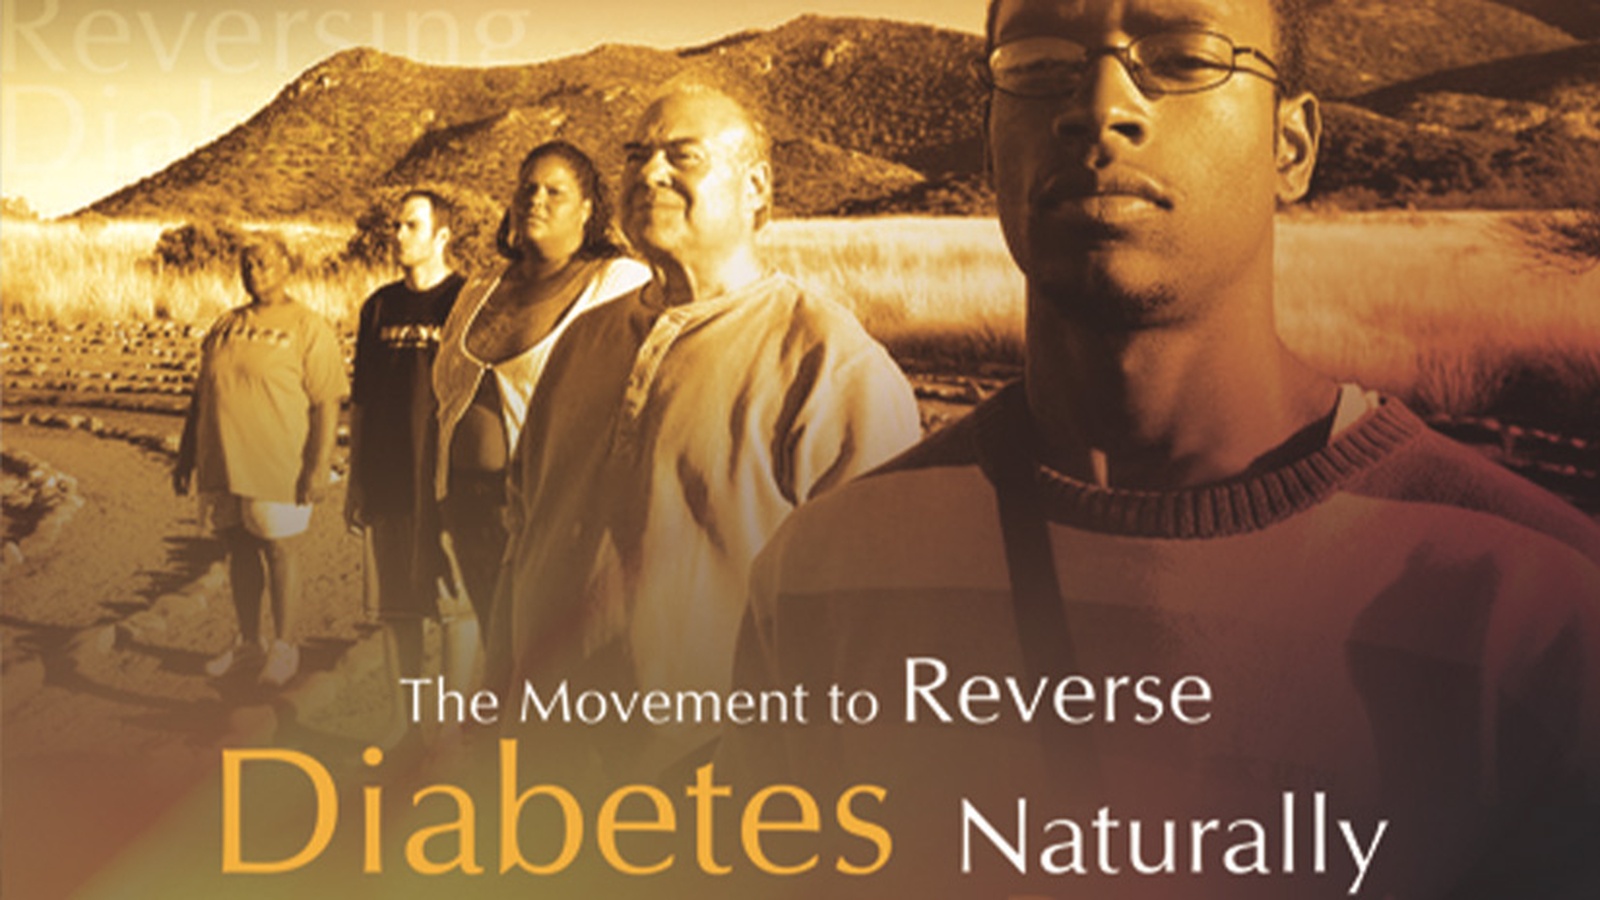 Can You Reverse Diabetes In 30 Days?